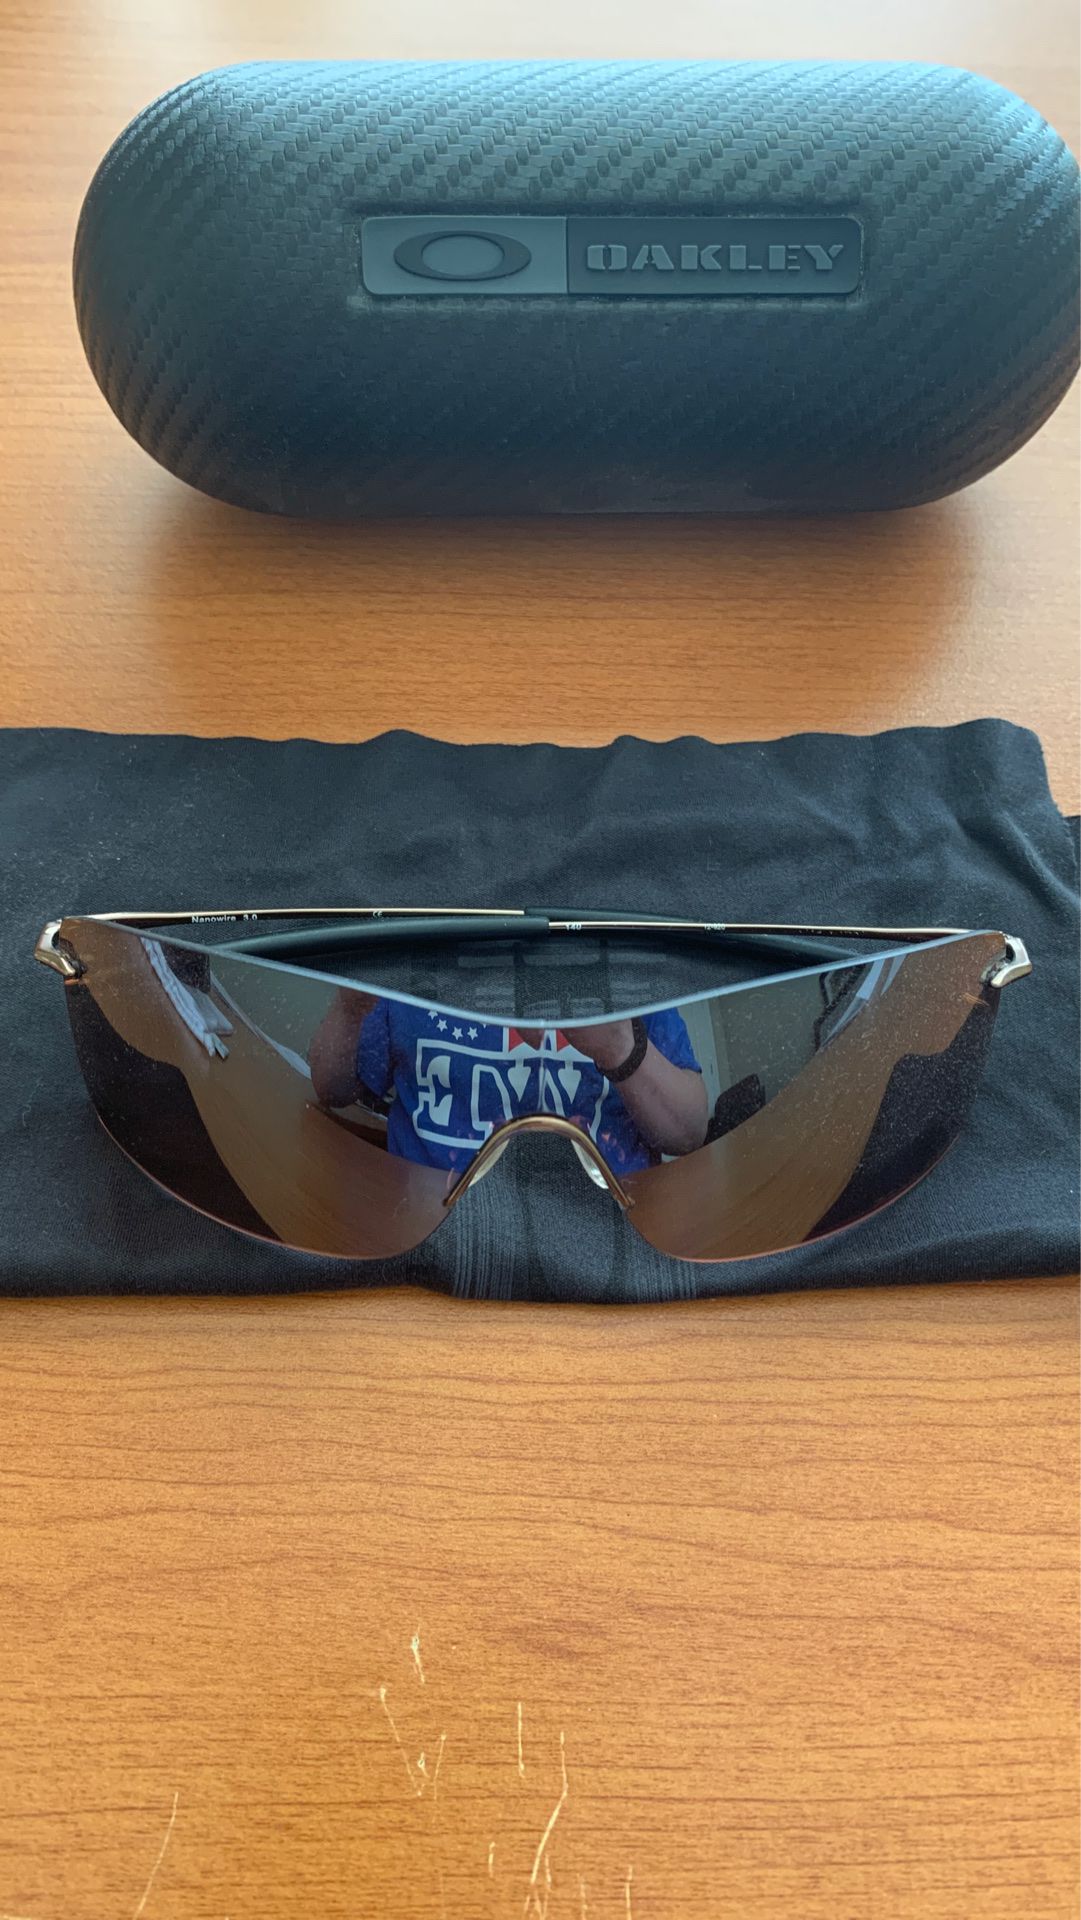 Oakley sunglasses delivery or pickup only no shipping